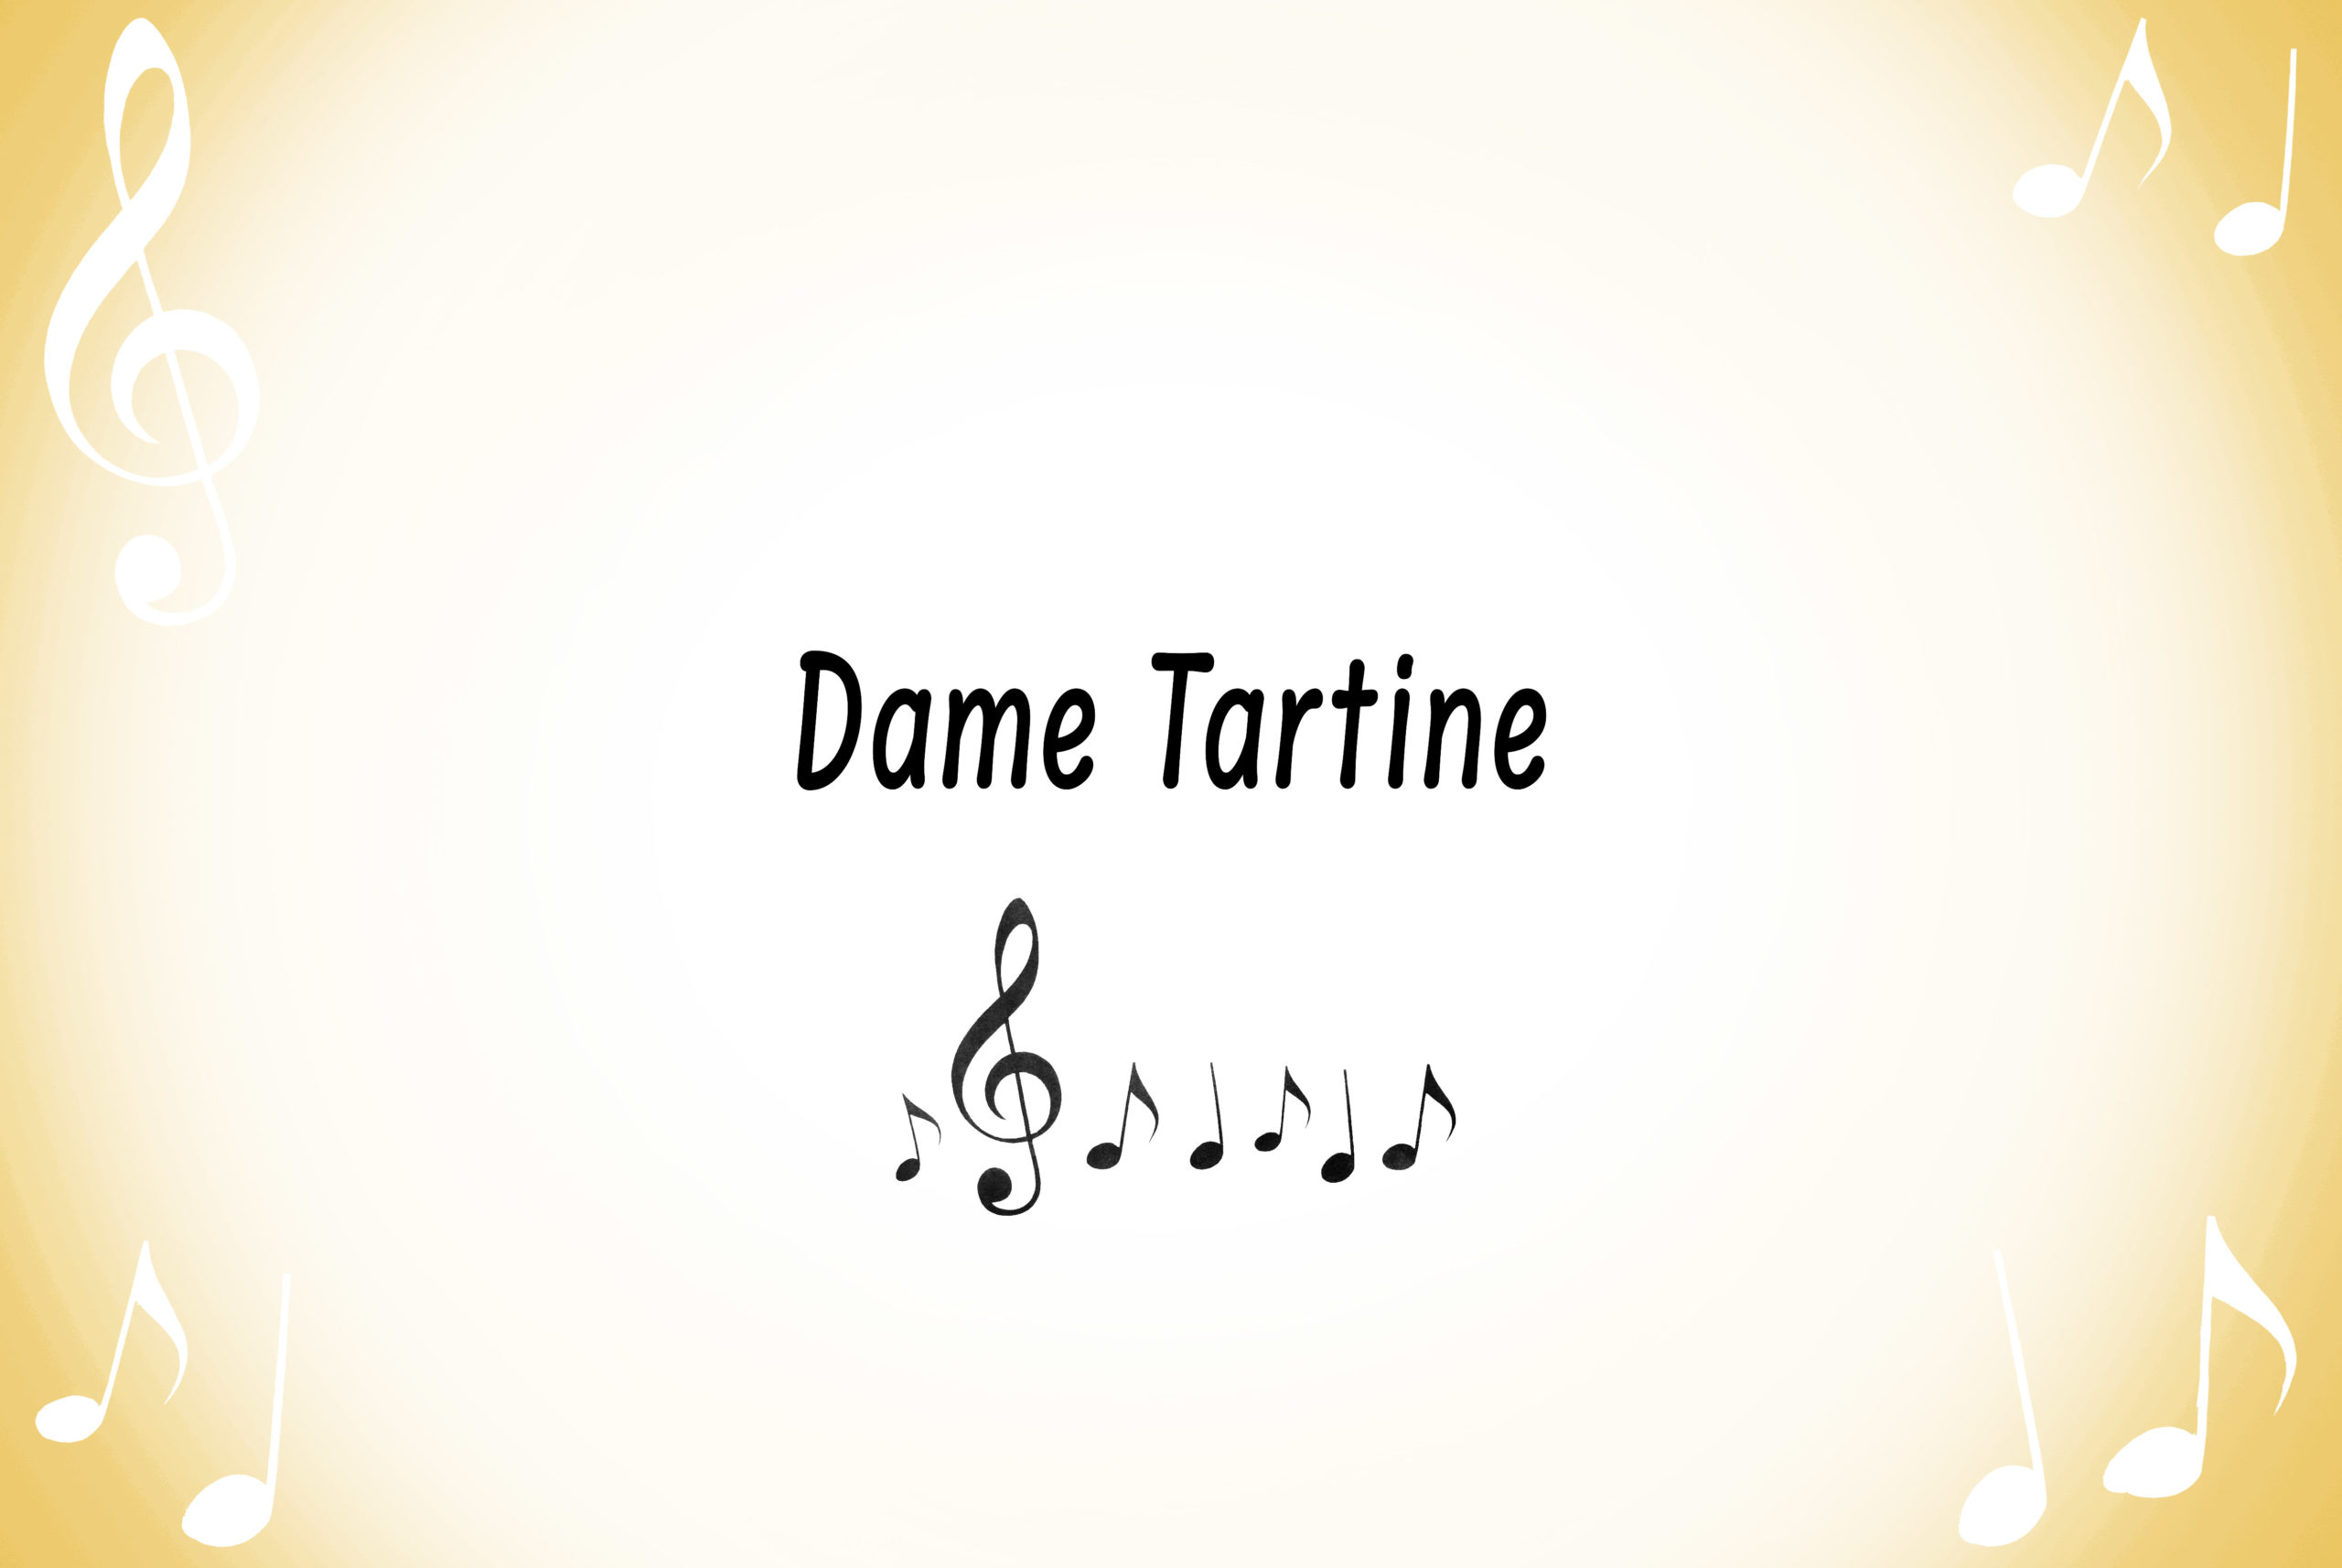 Dame Tartine © French Moments